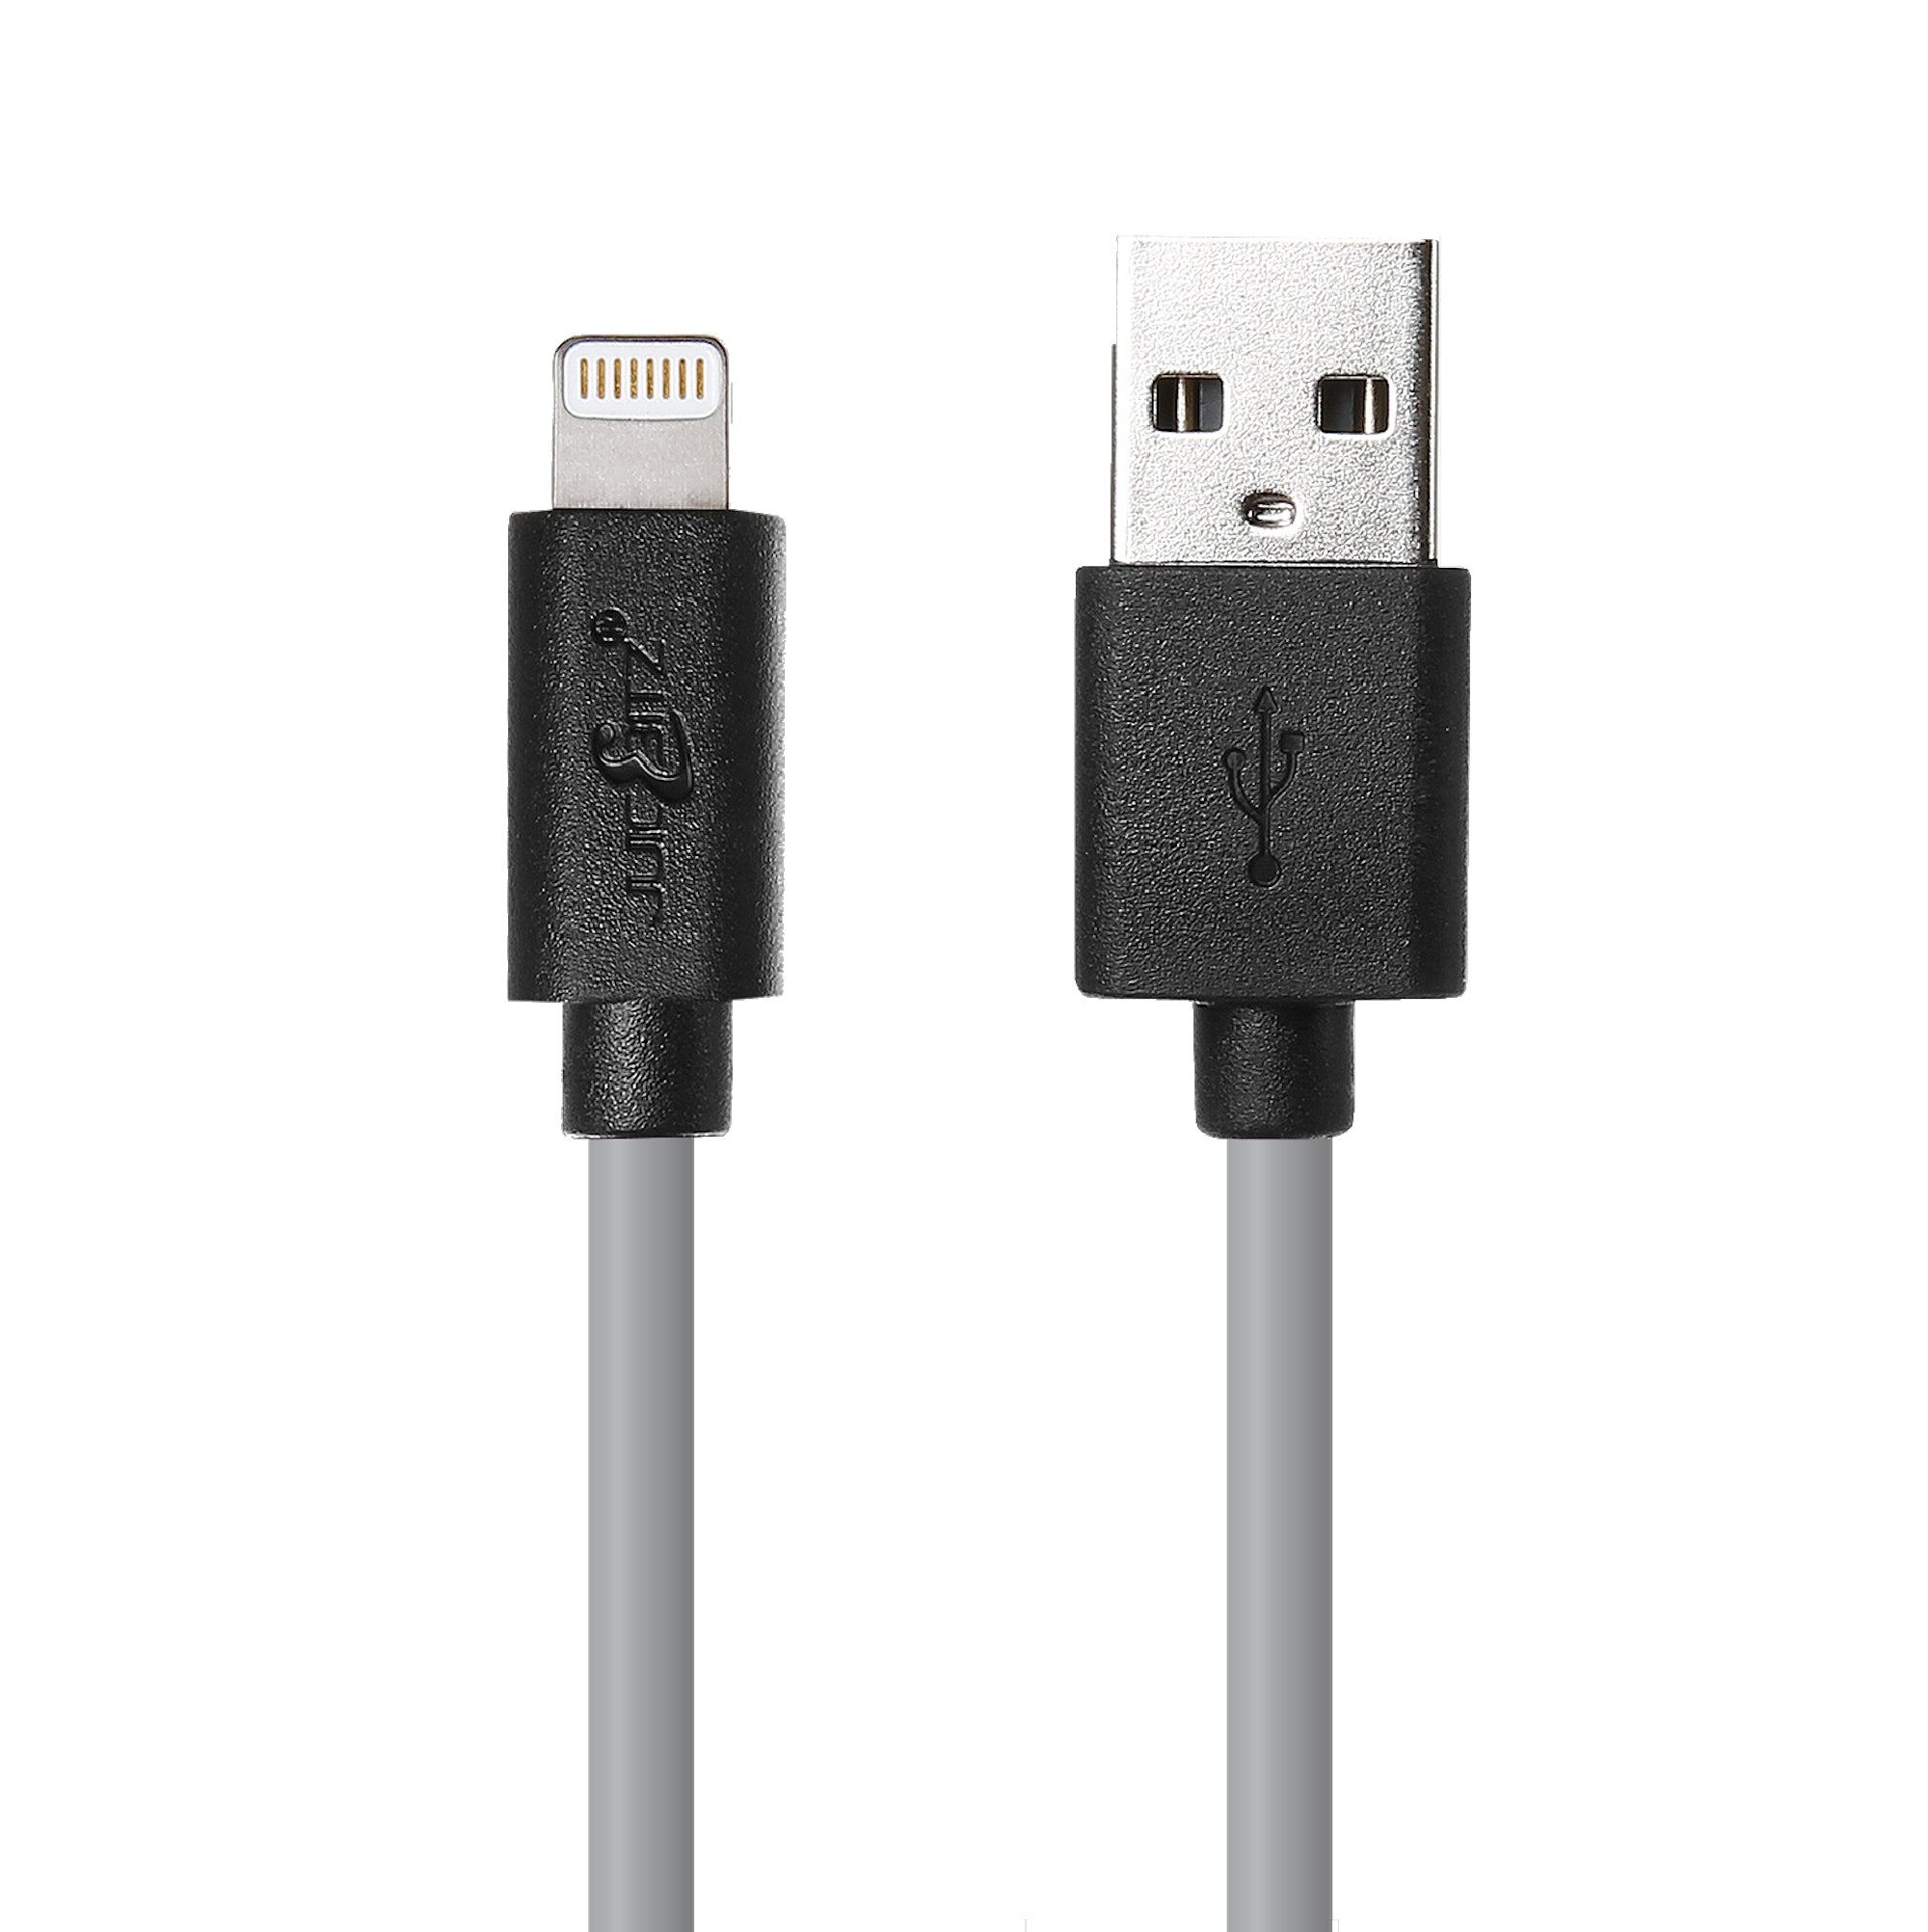 USB Charger Cable Data Sync Lead for iPhone, iPad, iPod - Grey